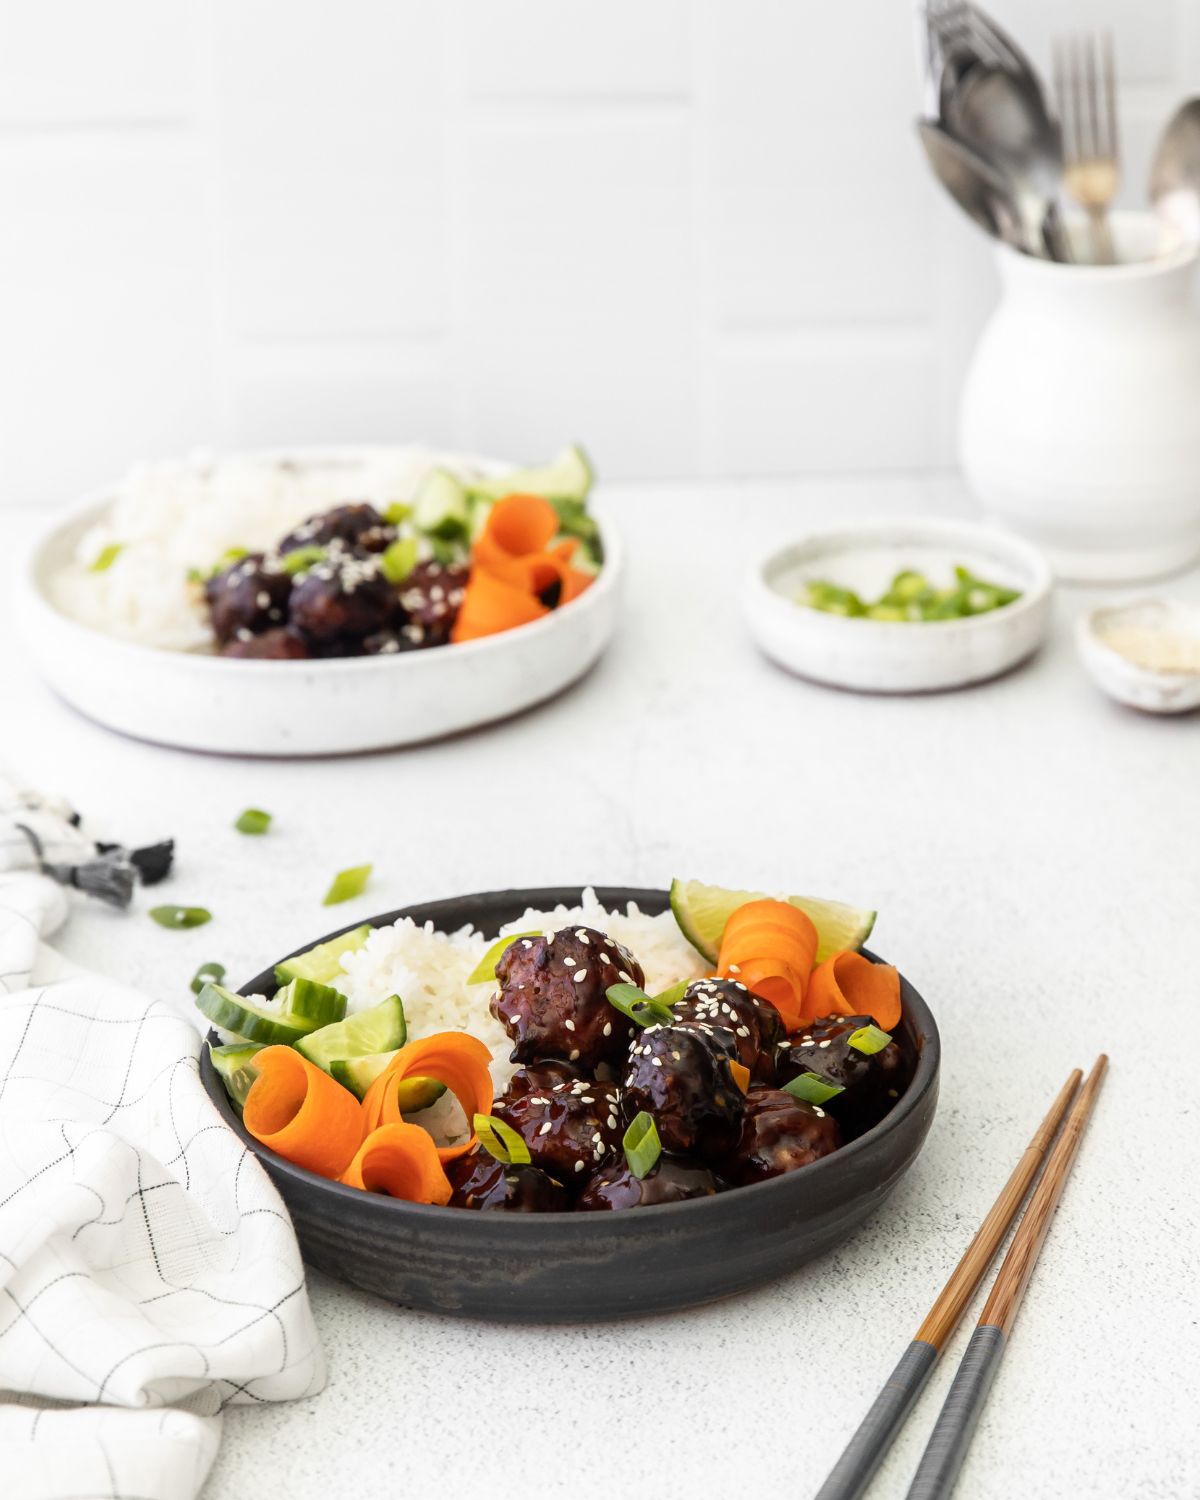 Asian ginger meatballs in a bowl with rice and carrots.